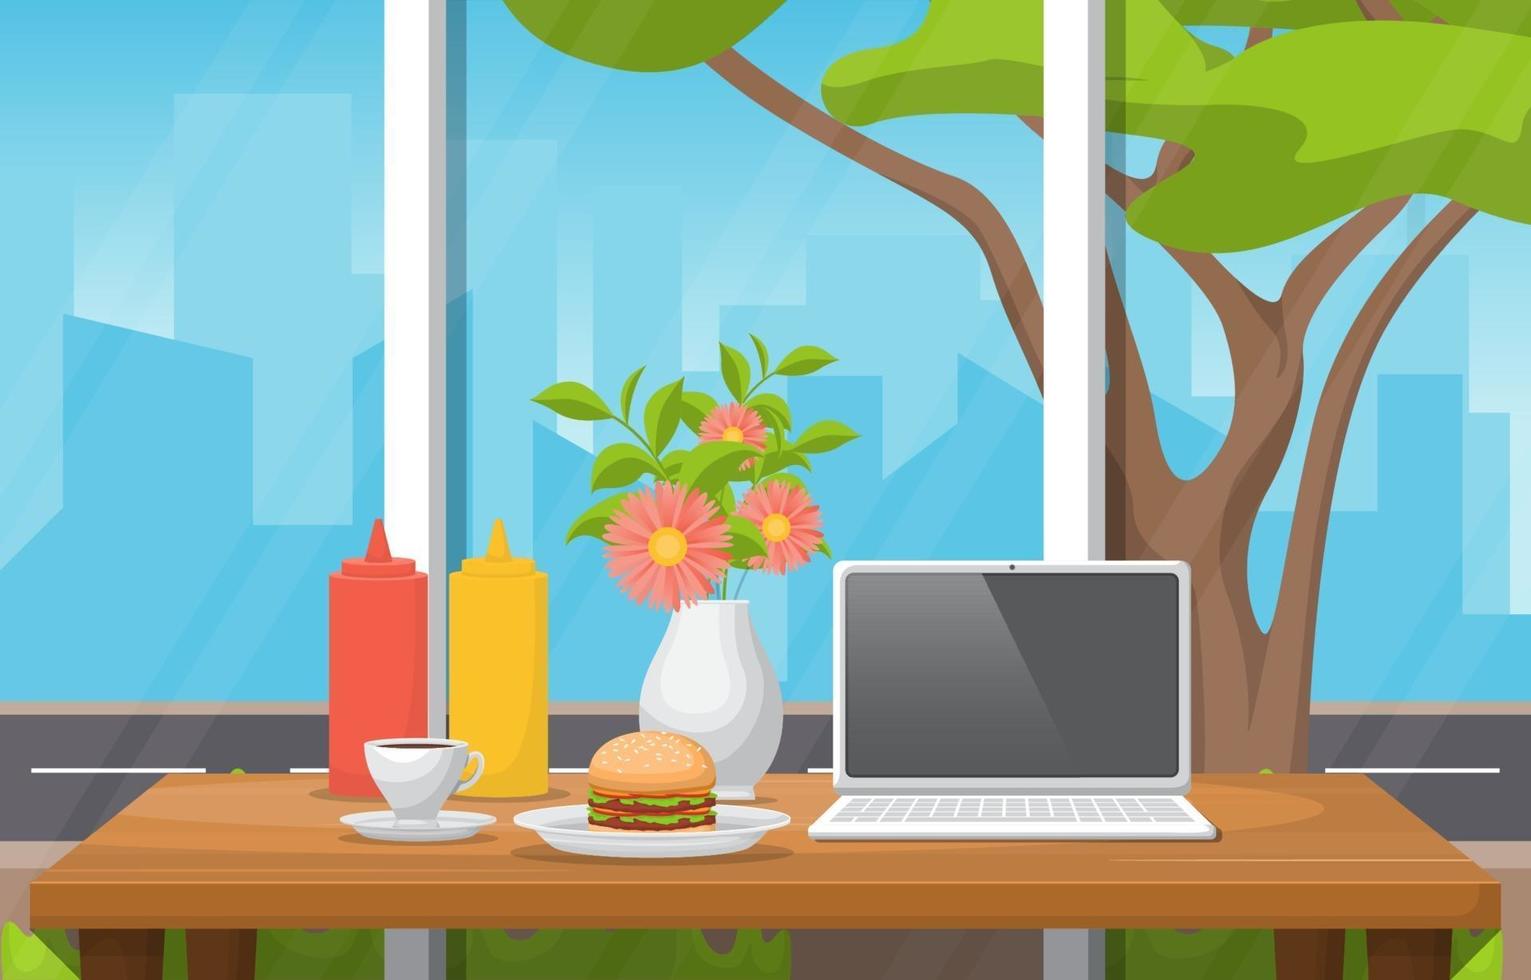 Lunch at Restaurant with City View Illustration vector